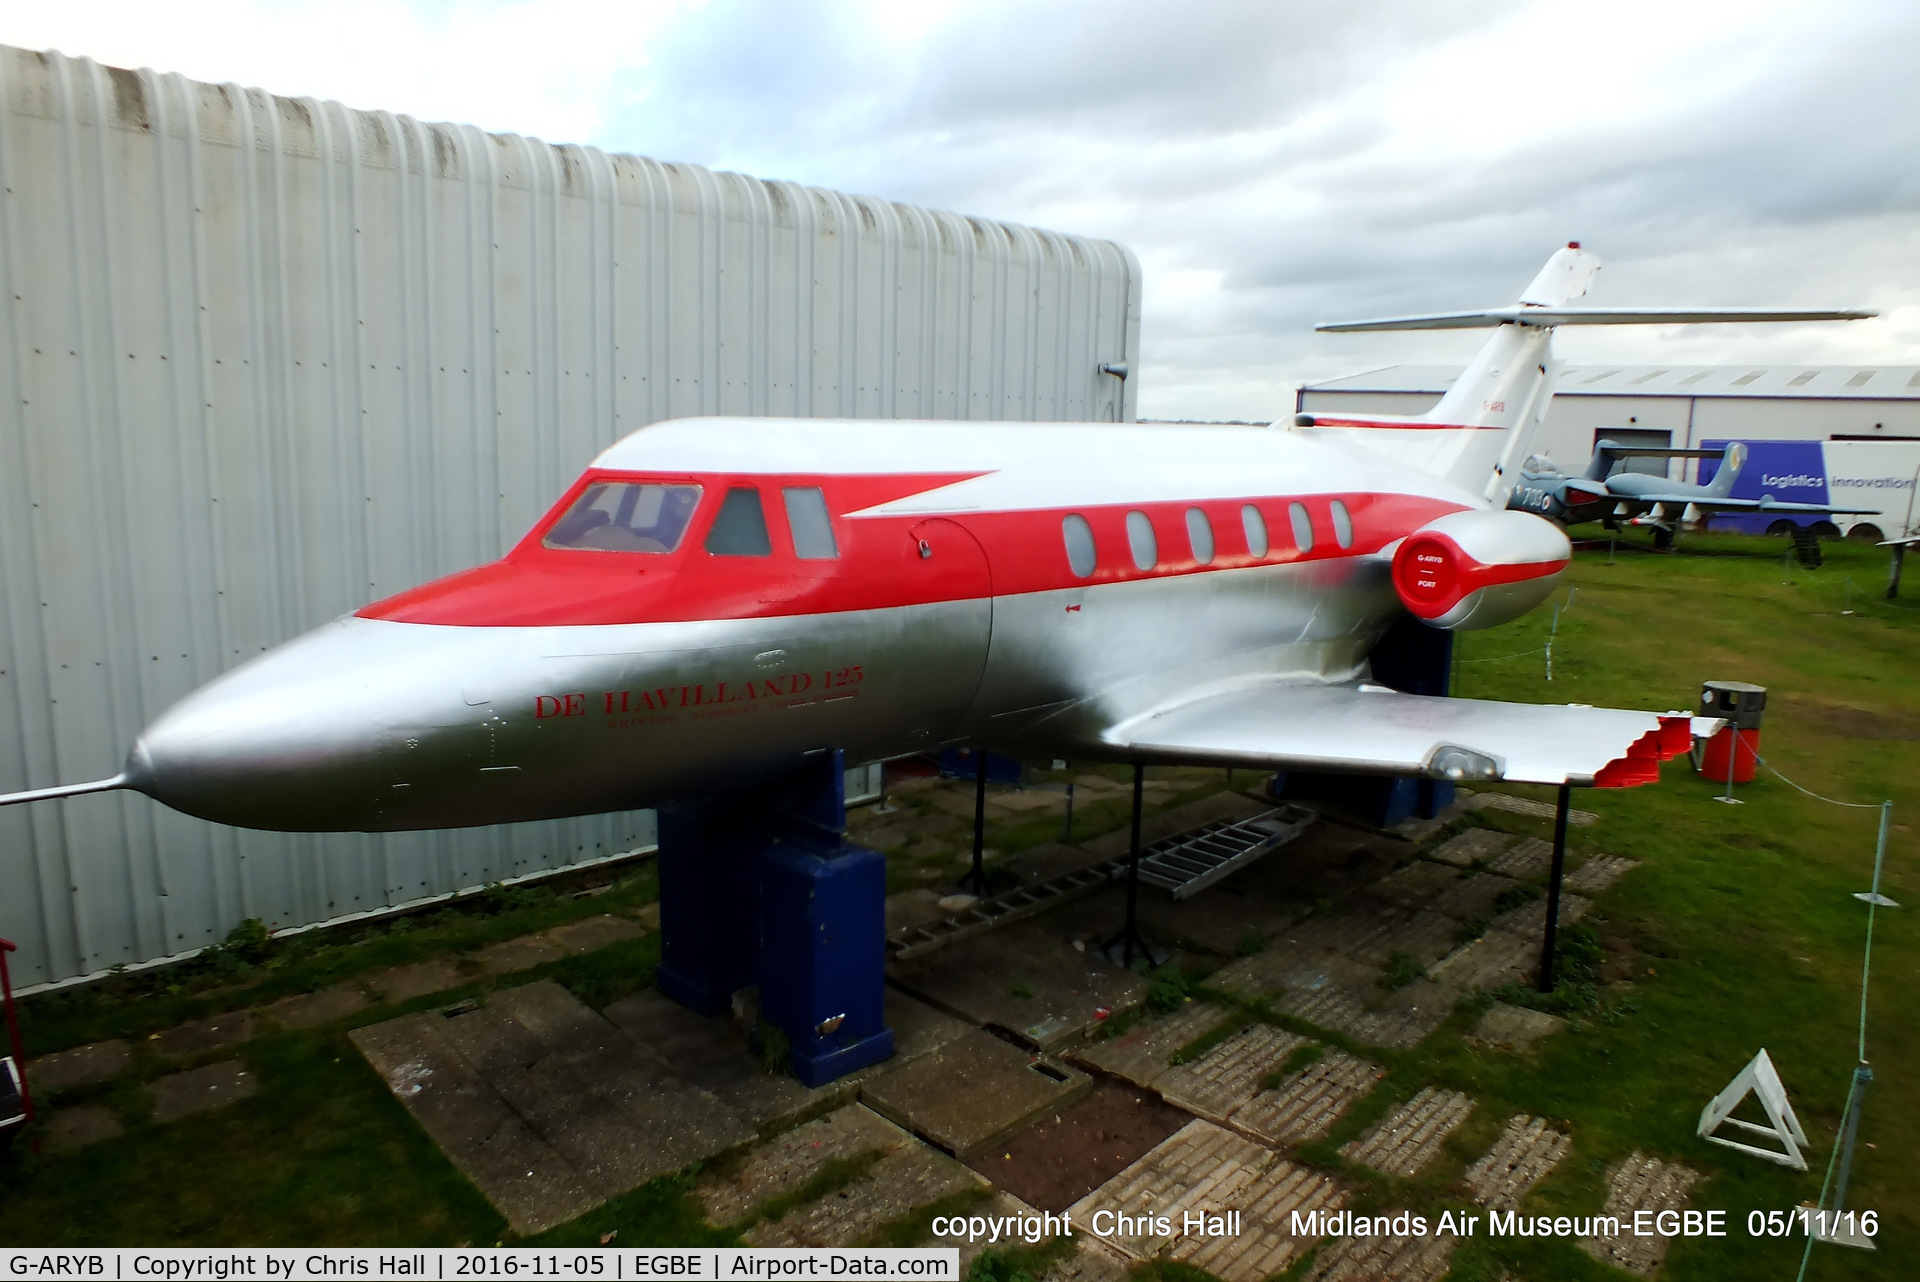 G-ARYB, 1963 De Havilland DH-125 Series 1/521 C/N 25002, preserved at the Midland Air Museum